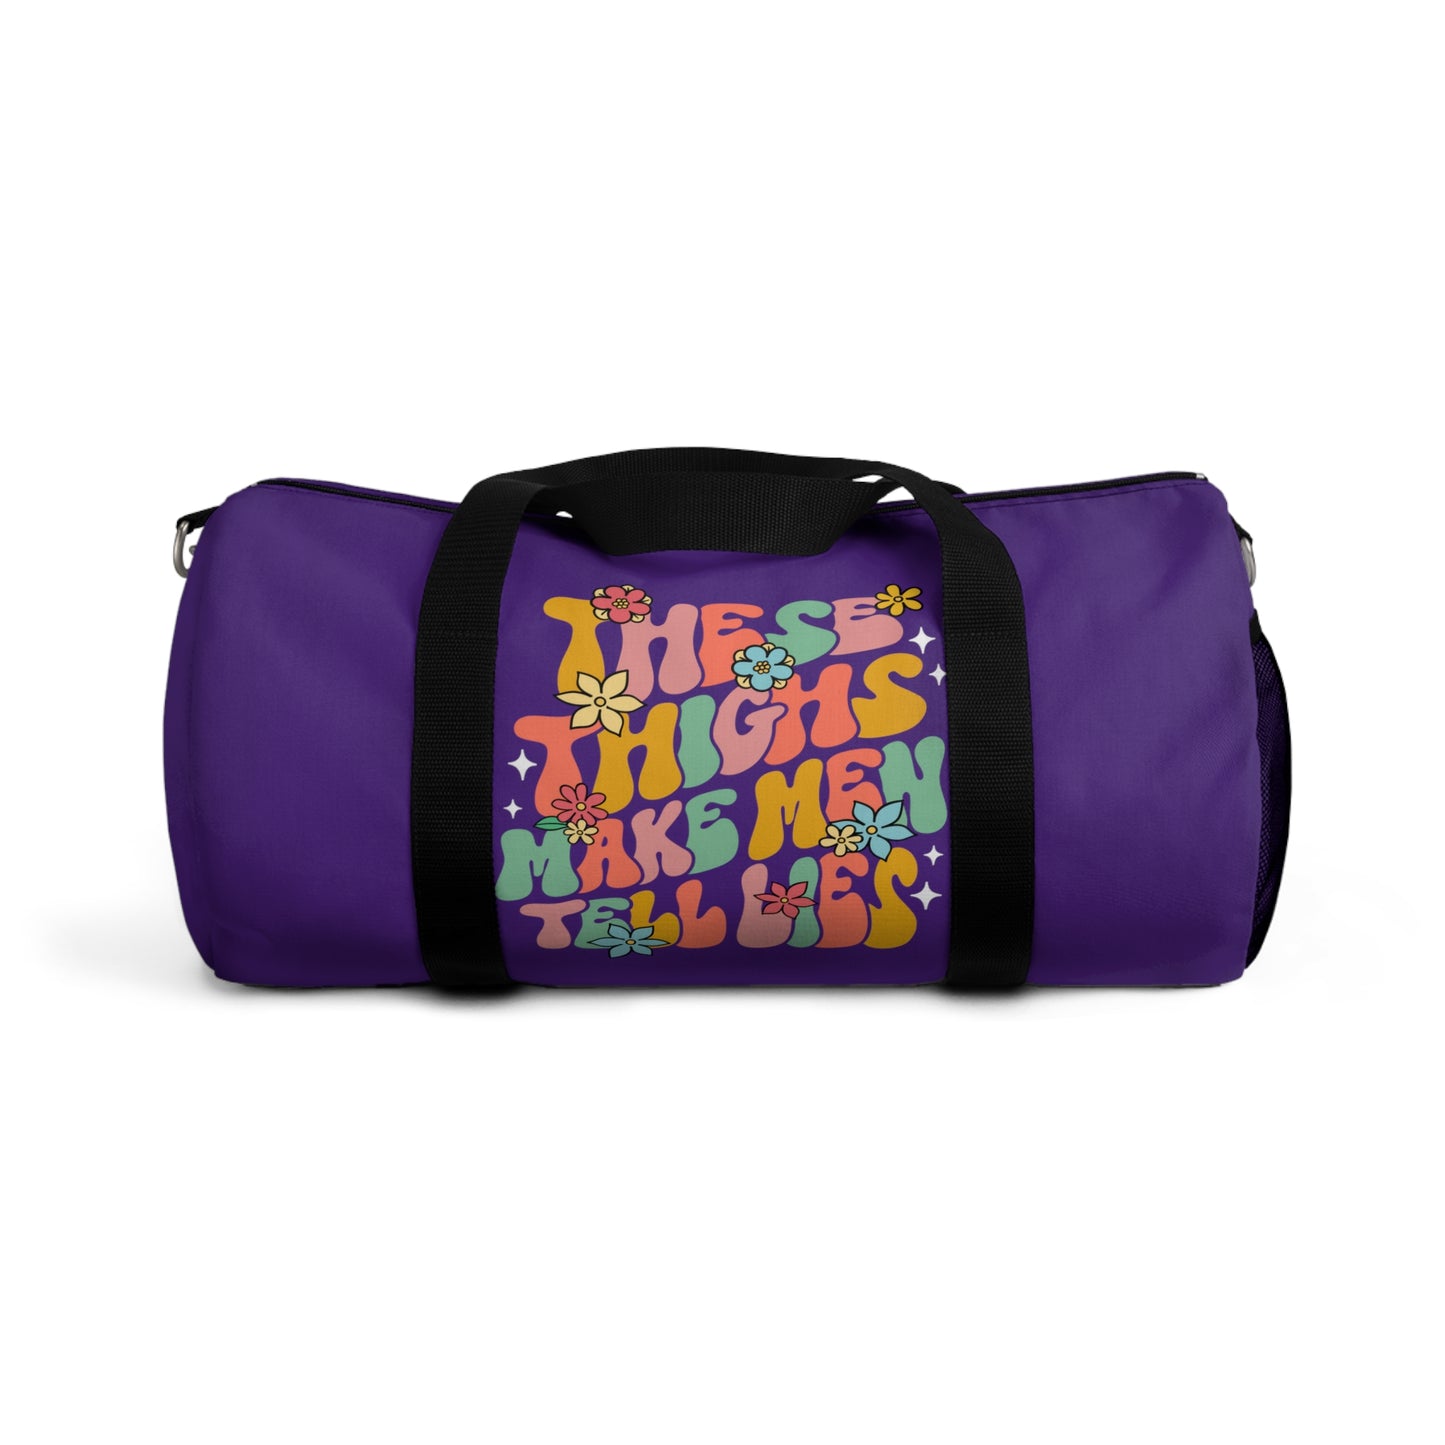 These Thighs Duffle Bag